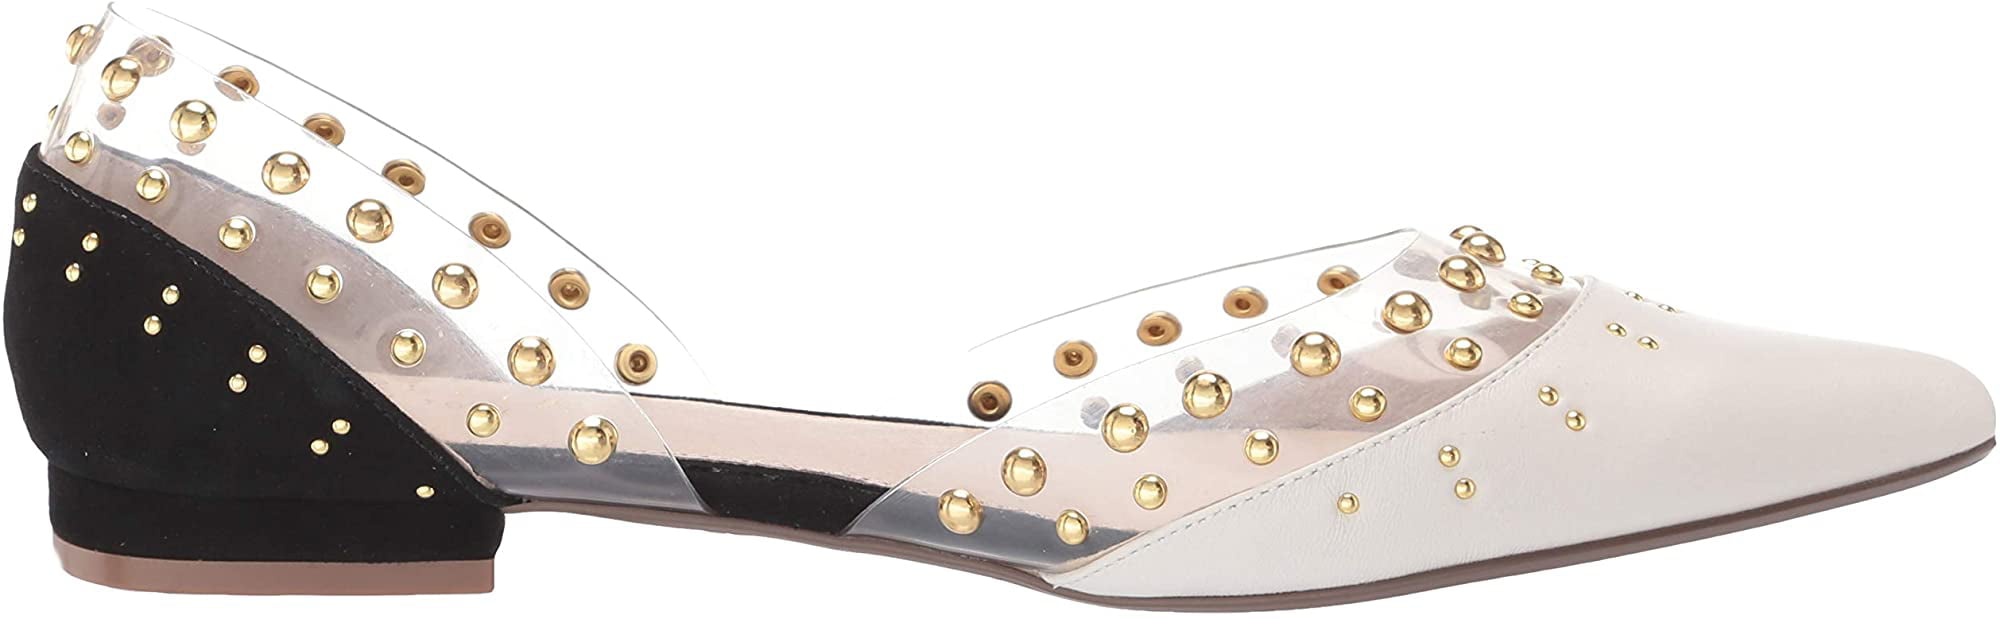 Cecelia New York Min Ballet Flats Navy White Clear Chic Pointy Studded Shoe 